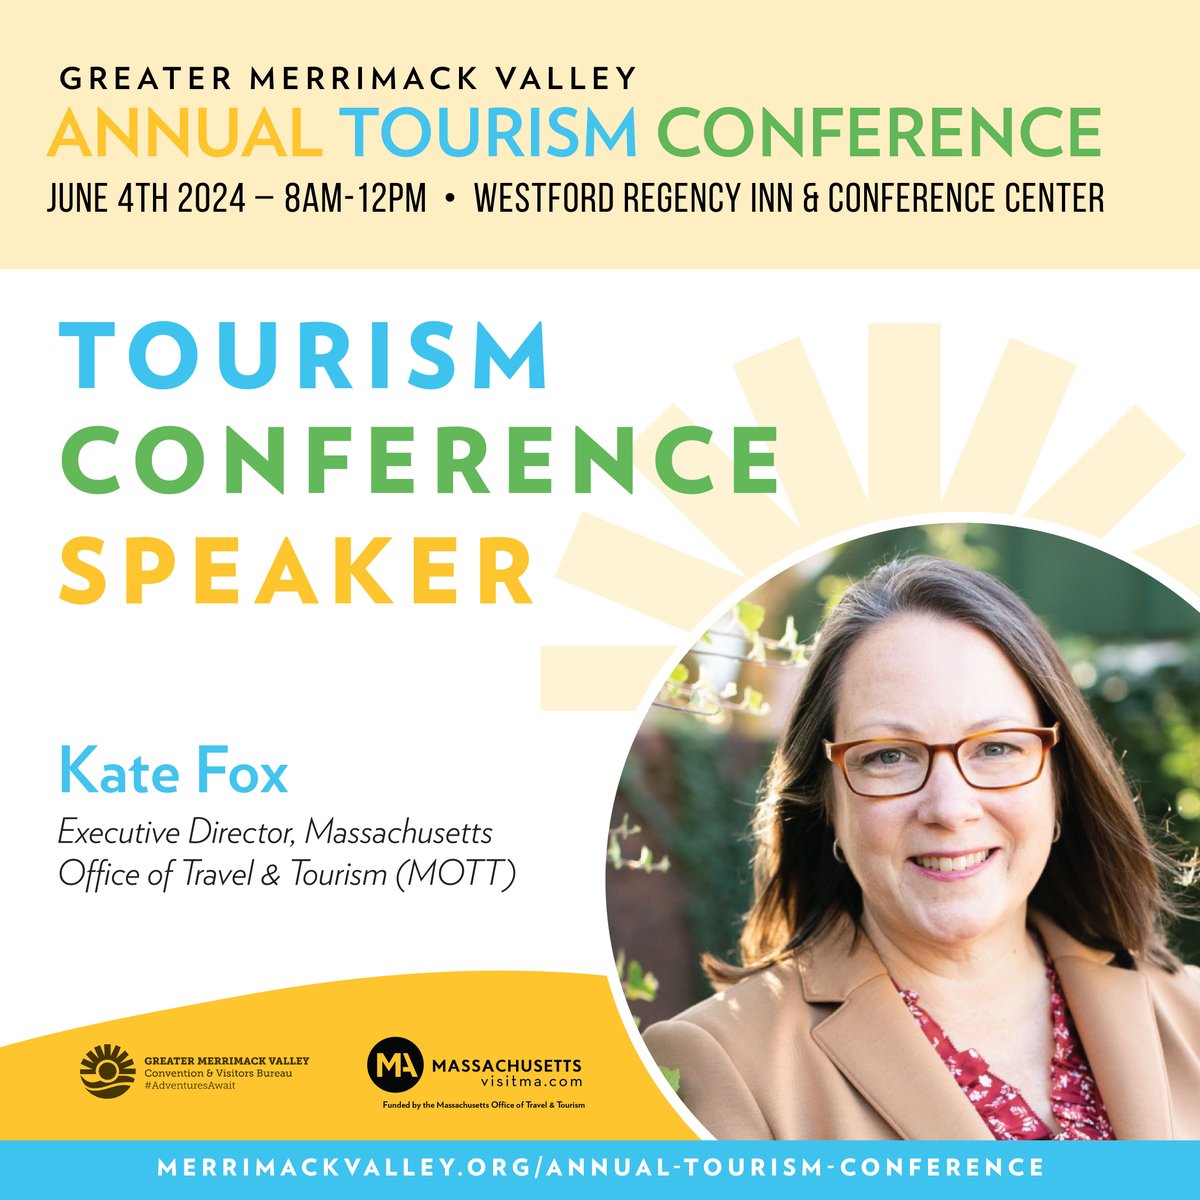 🌟 Spotlight on Kate Fox! 🌟 We're honored to announce Kate Fox, Executive Director of the Massachusetts Office of Travel & Tourism (MOTT), as a distinguished speaker at the 2024 Annual Tourism Conference. @visitma merrimackvalley.org/annual-tourism… #MerrimackValley #VisitMA